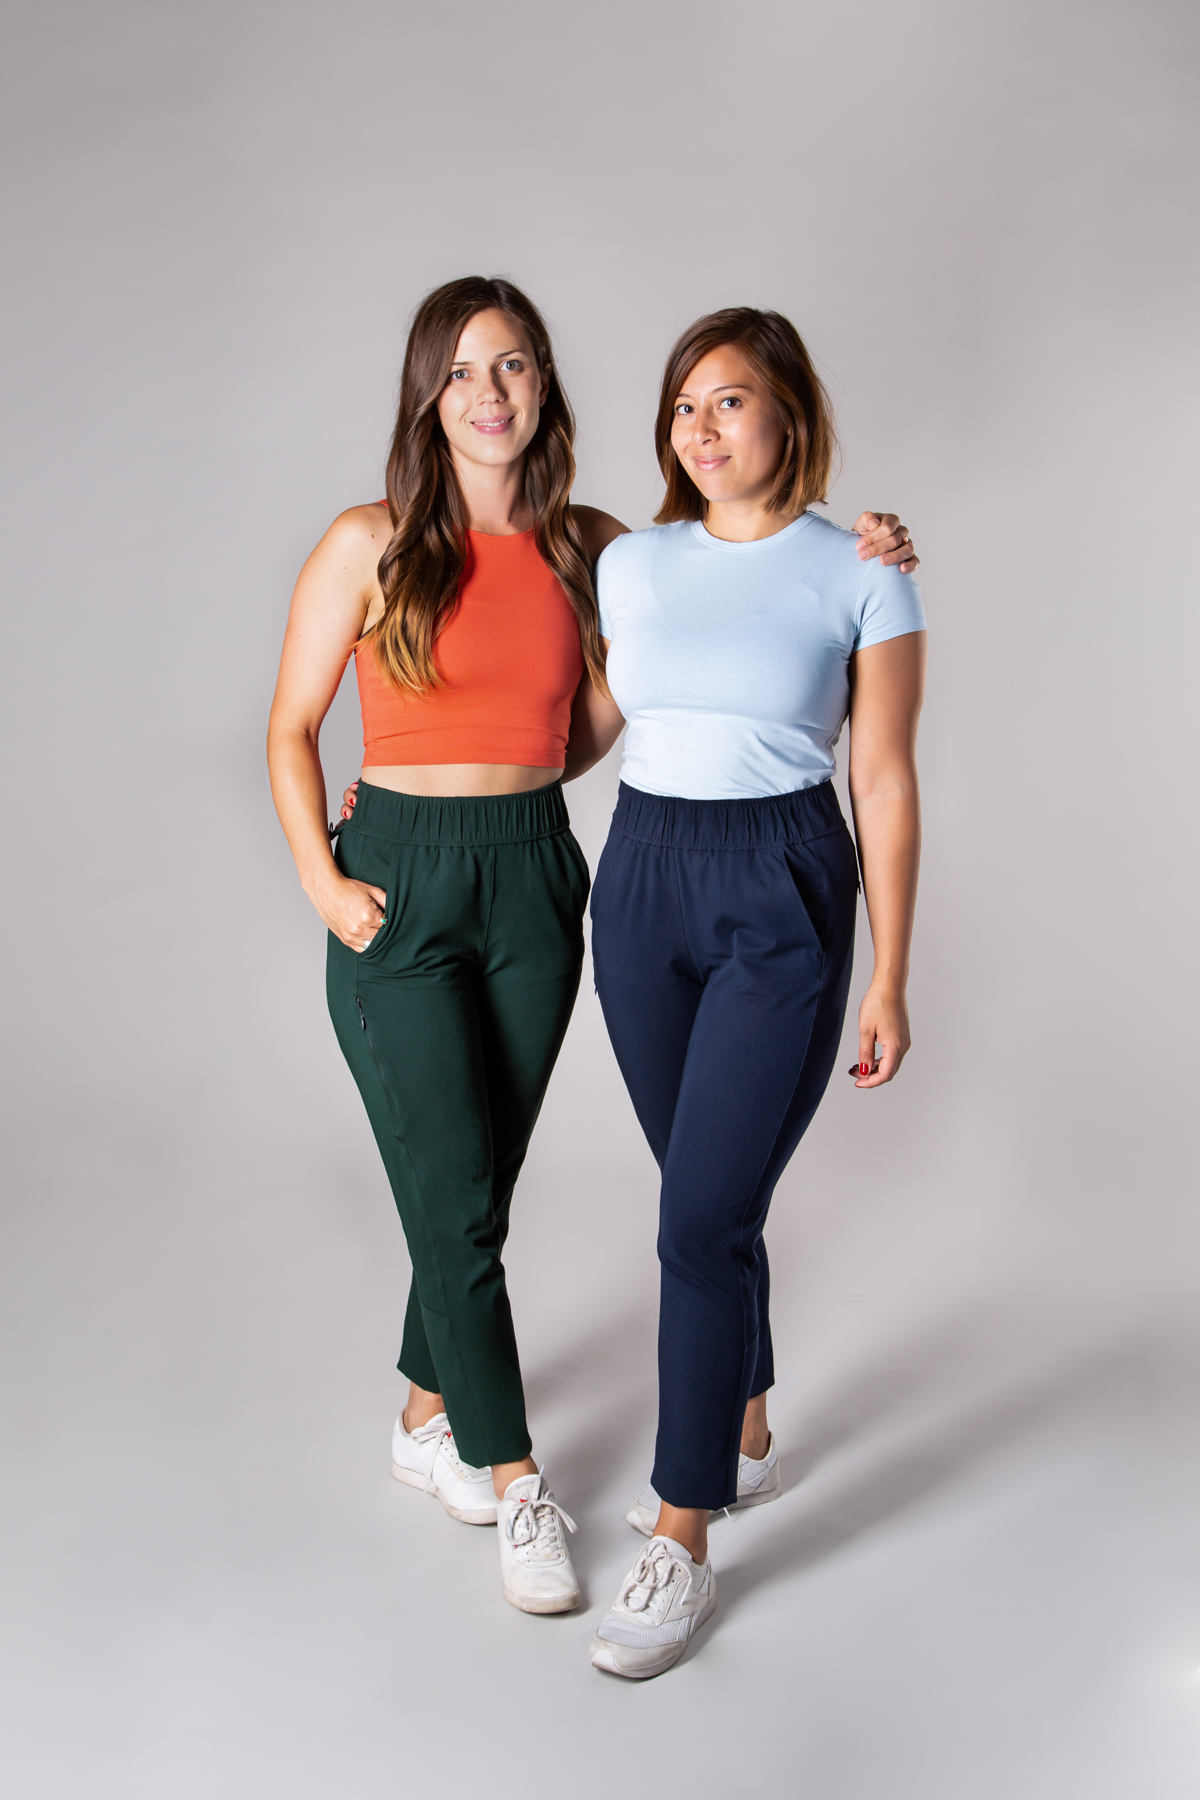 Meet The Female Co-Founders Who've Perfected Underwear For Working Out